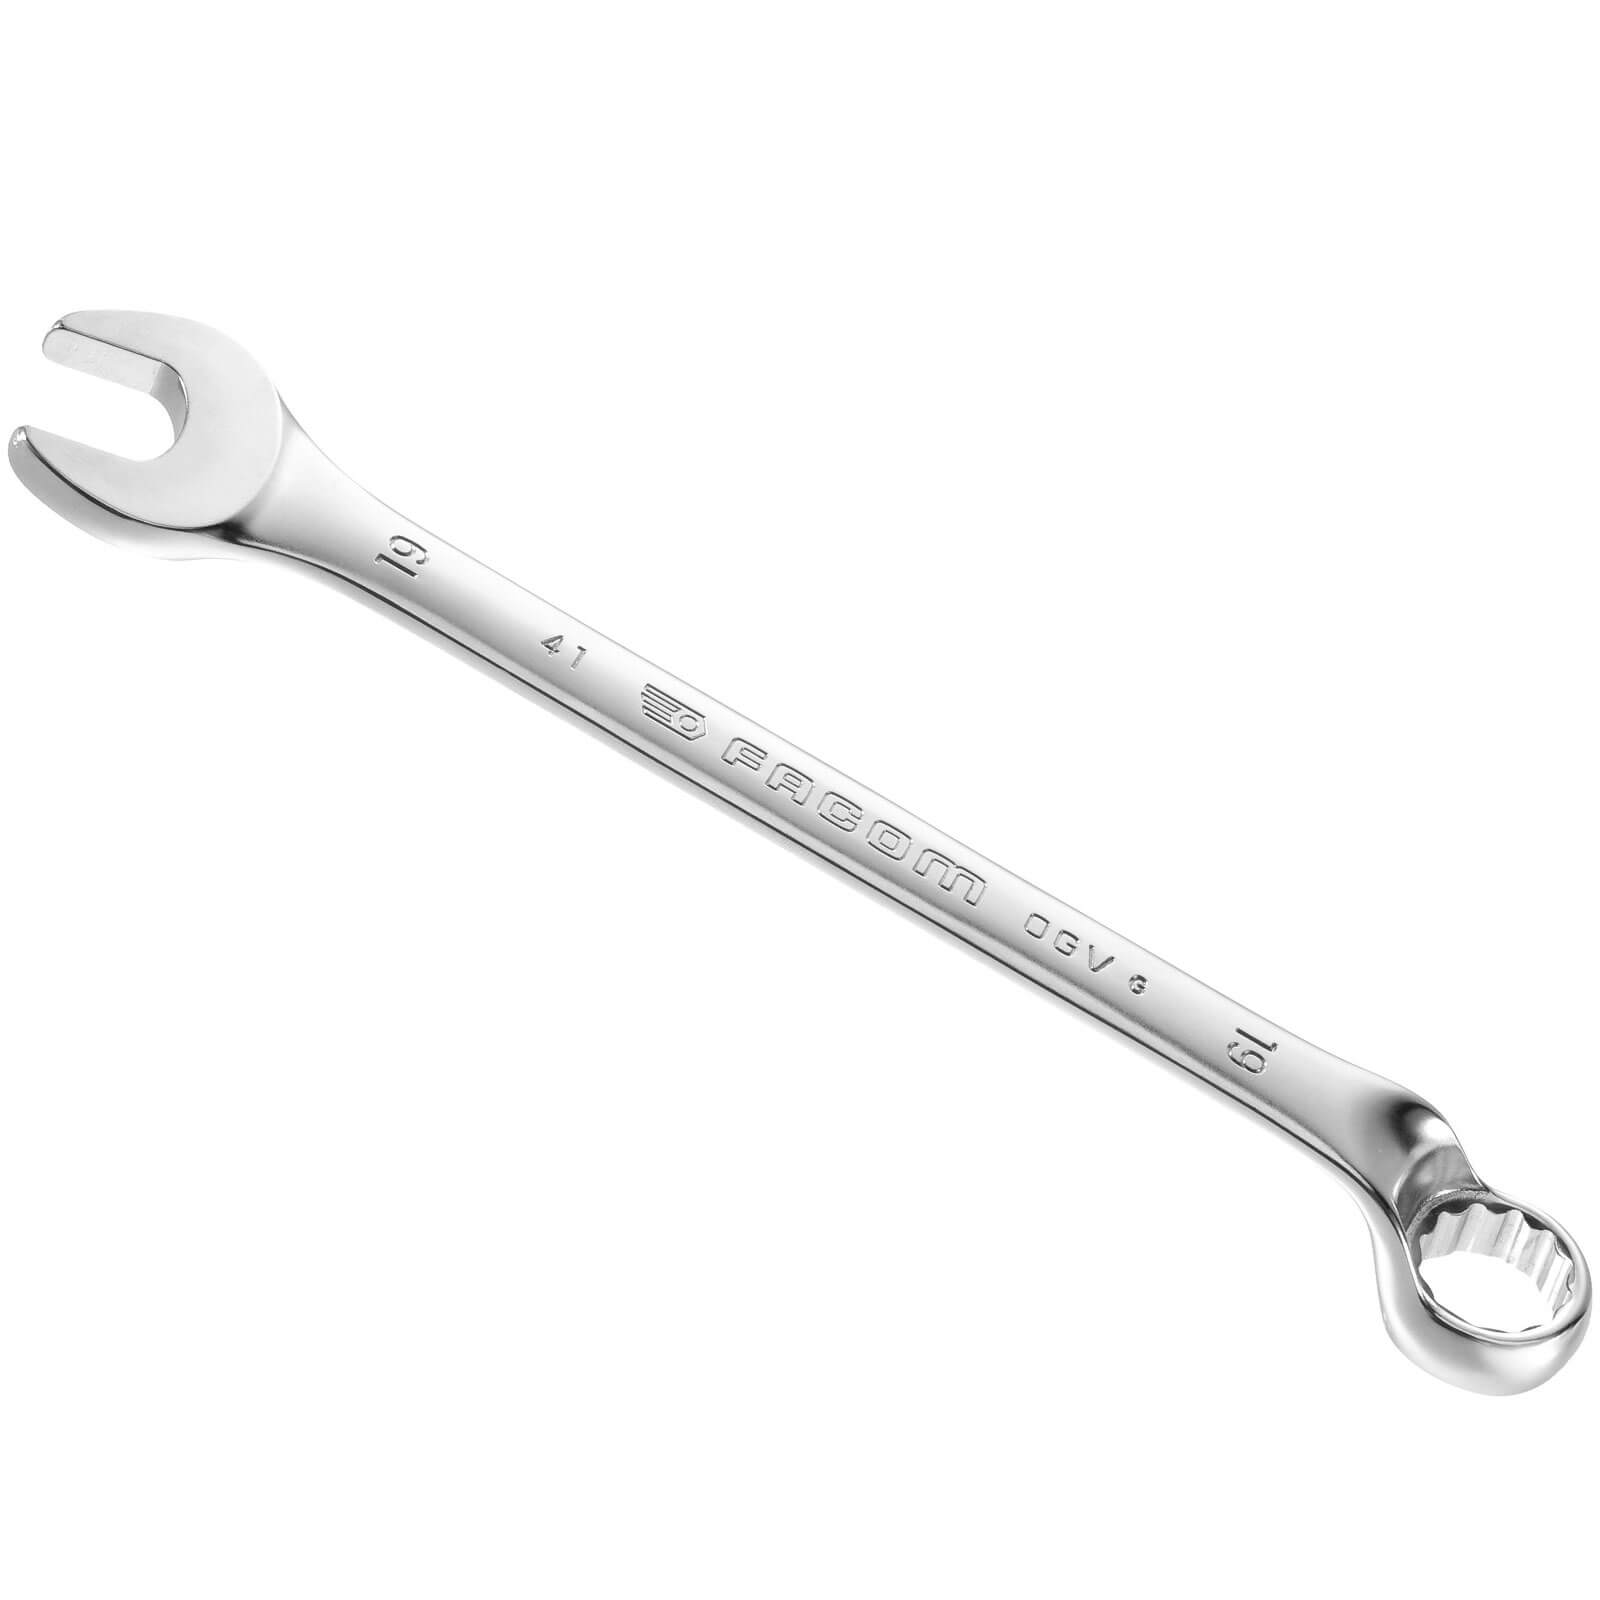 Photo of Facom 41 Series Offset Combination Spanner Metric 7mm